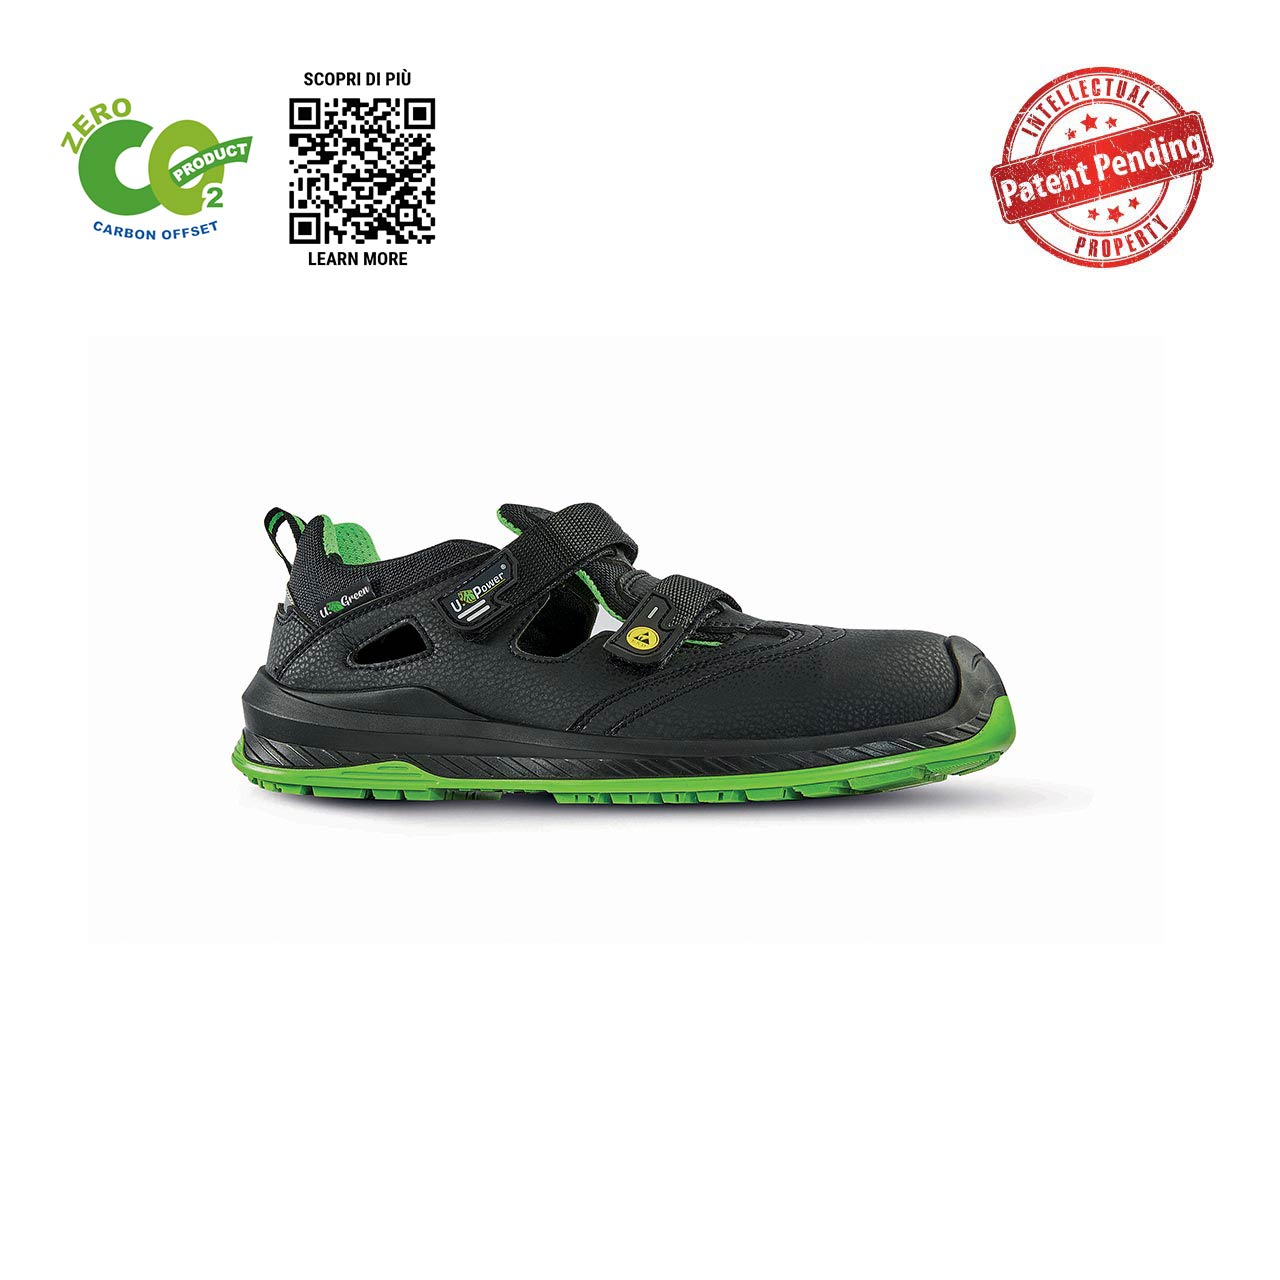 upower scarpa antinfortunistica modello brook linea red industry green vista laterale